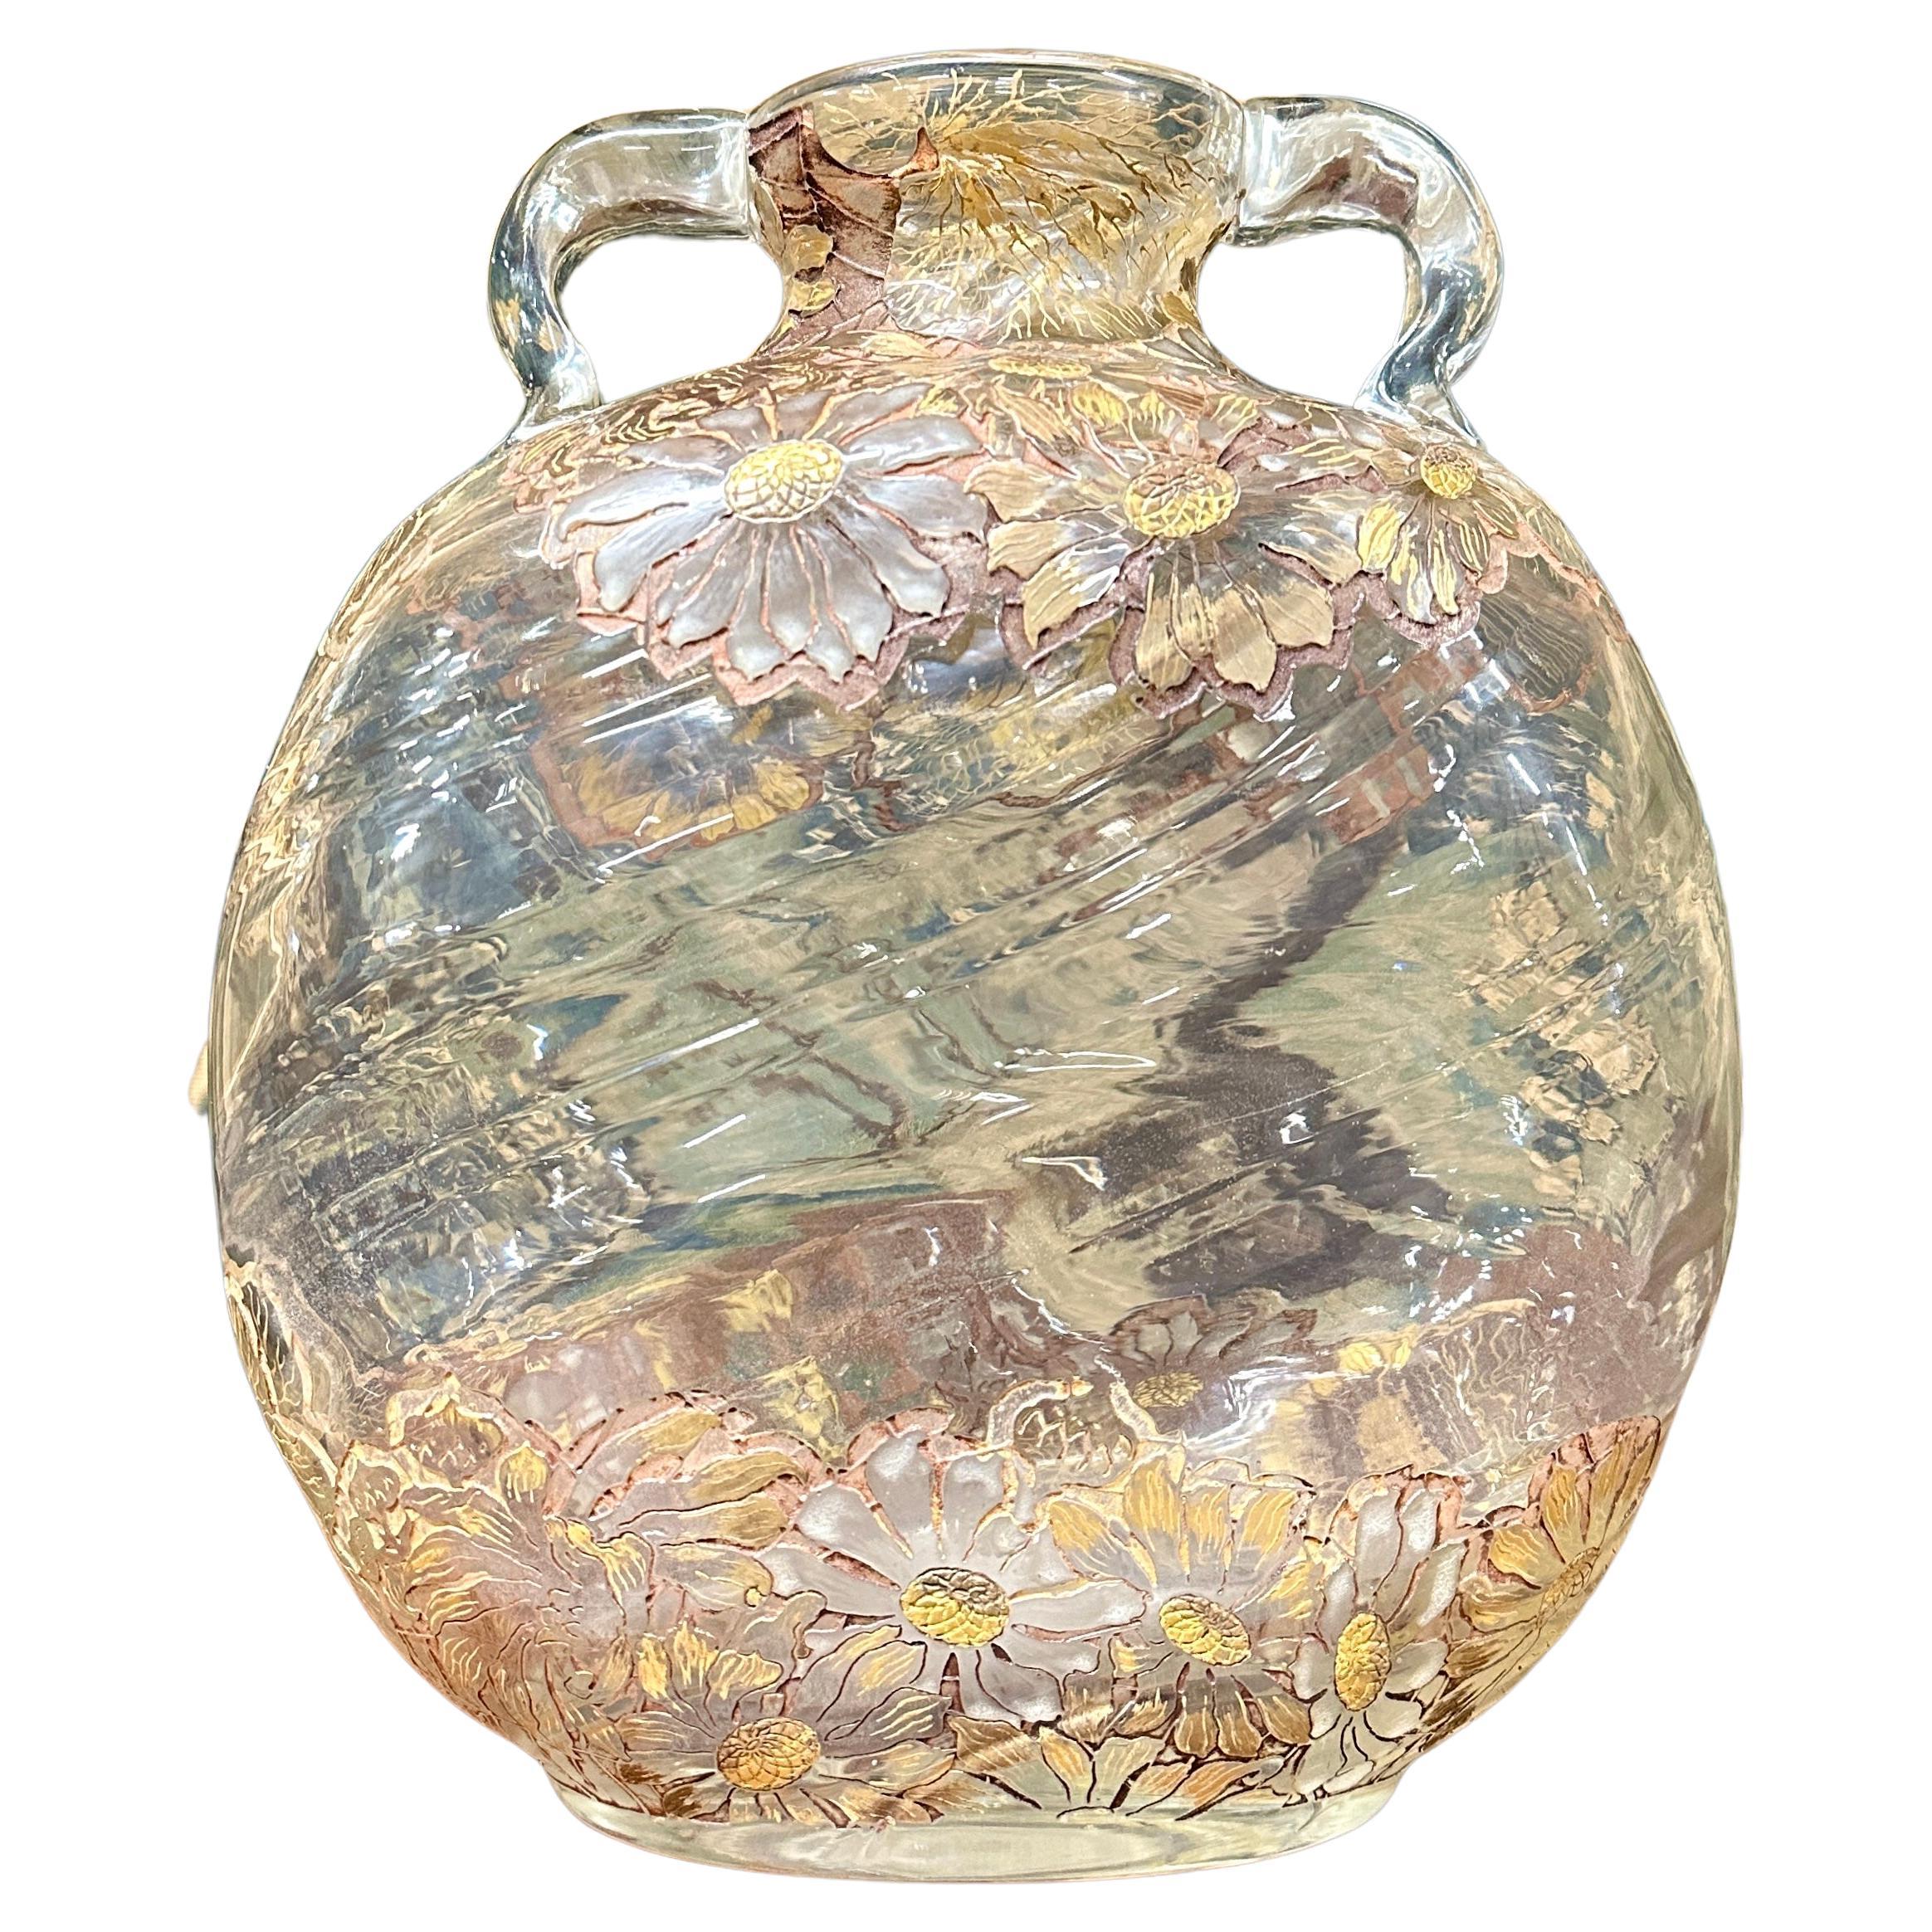 Emile Gallé - Rare Gourd Vase In Enamelled And Gilded Glass, Art Nouveau Period